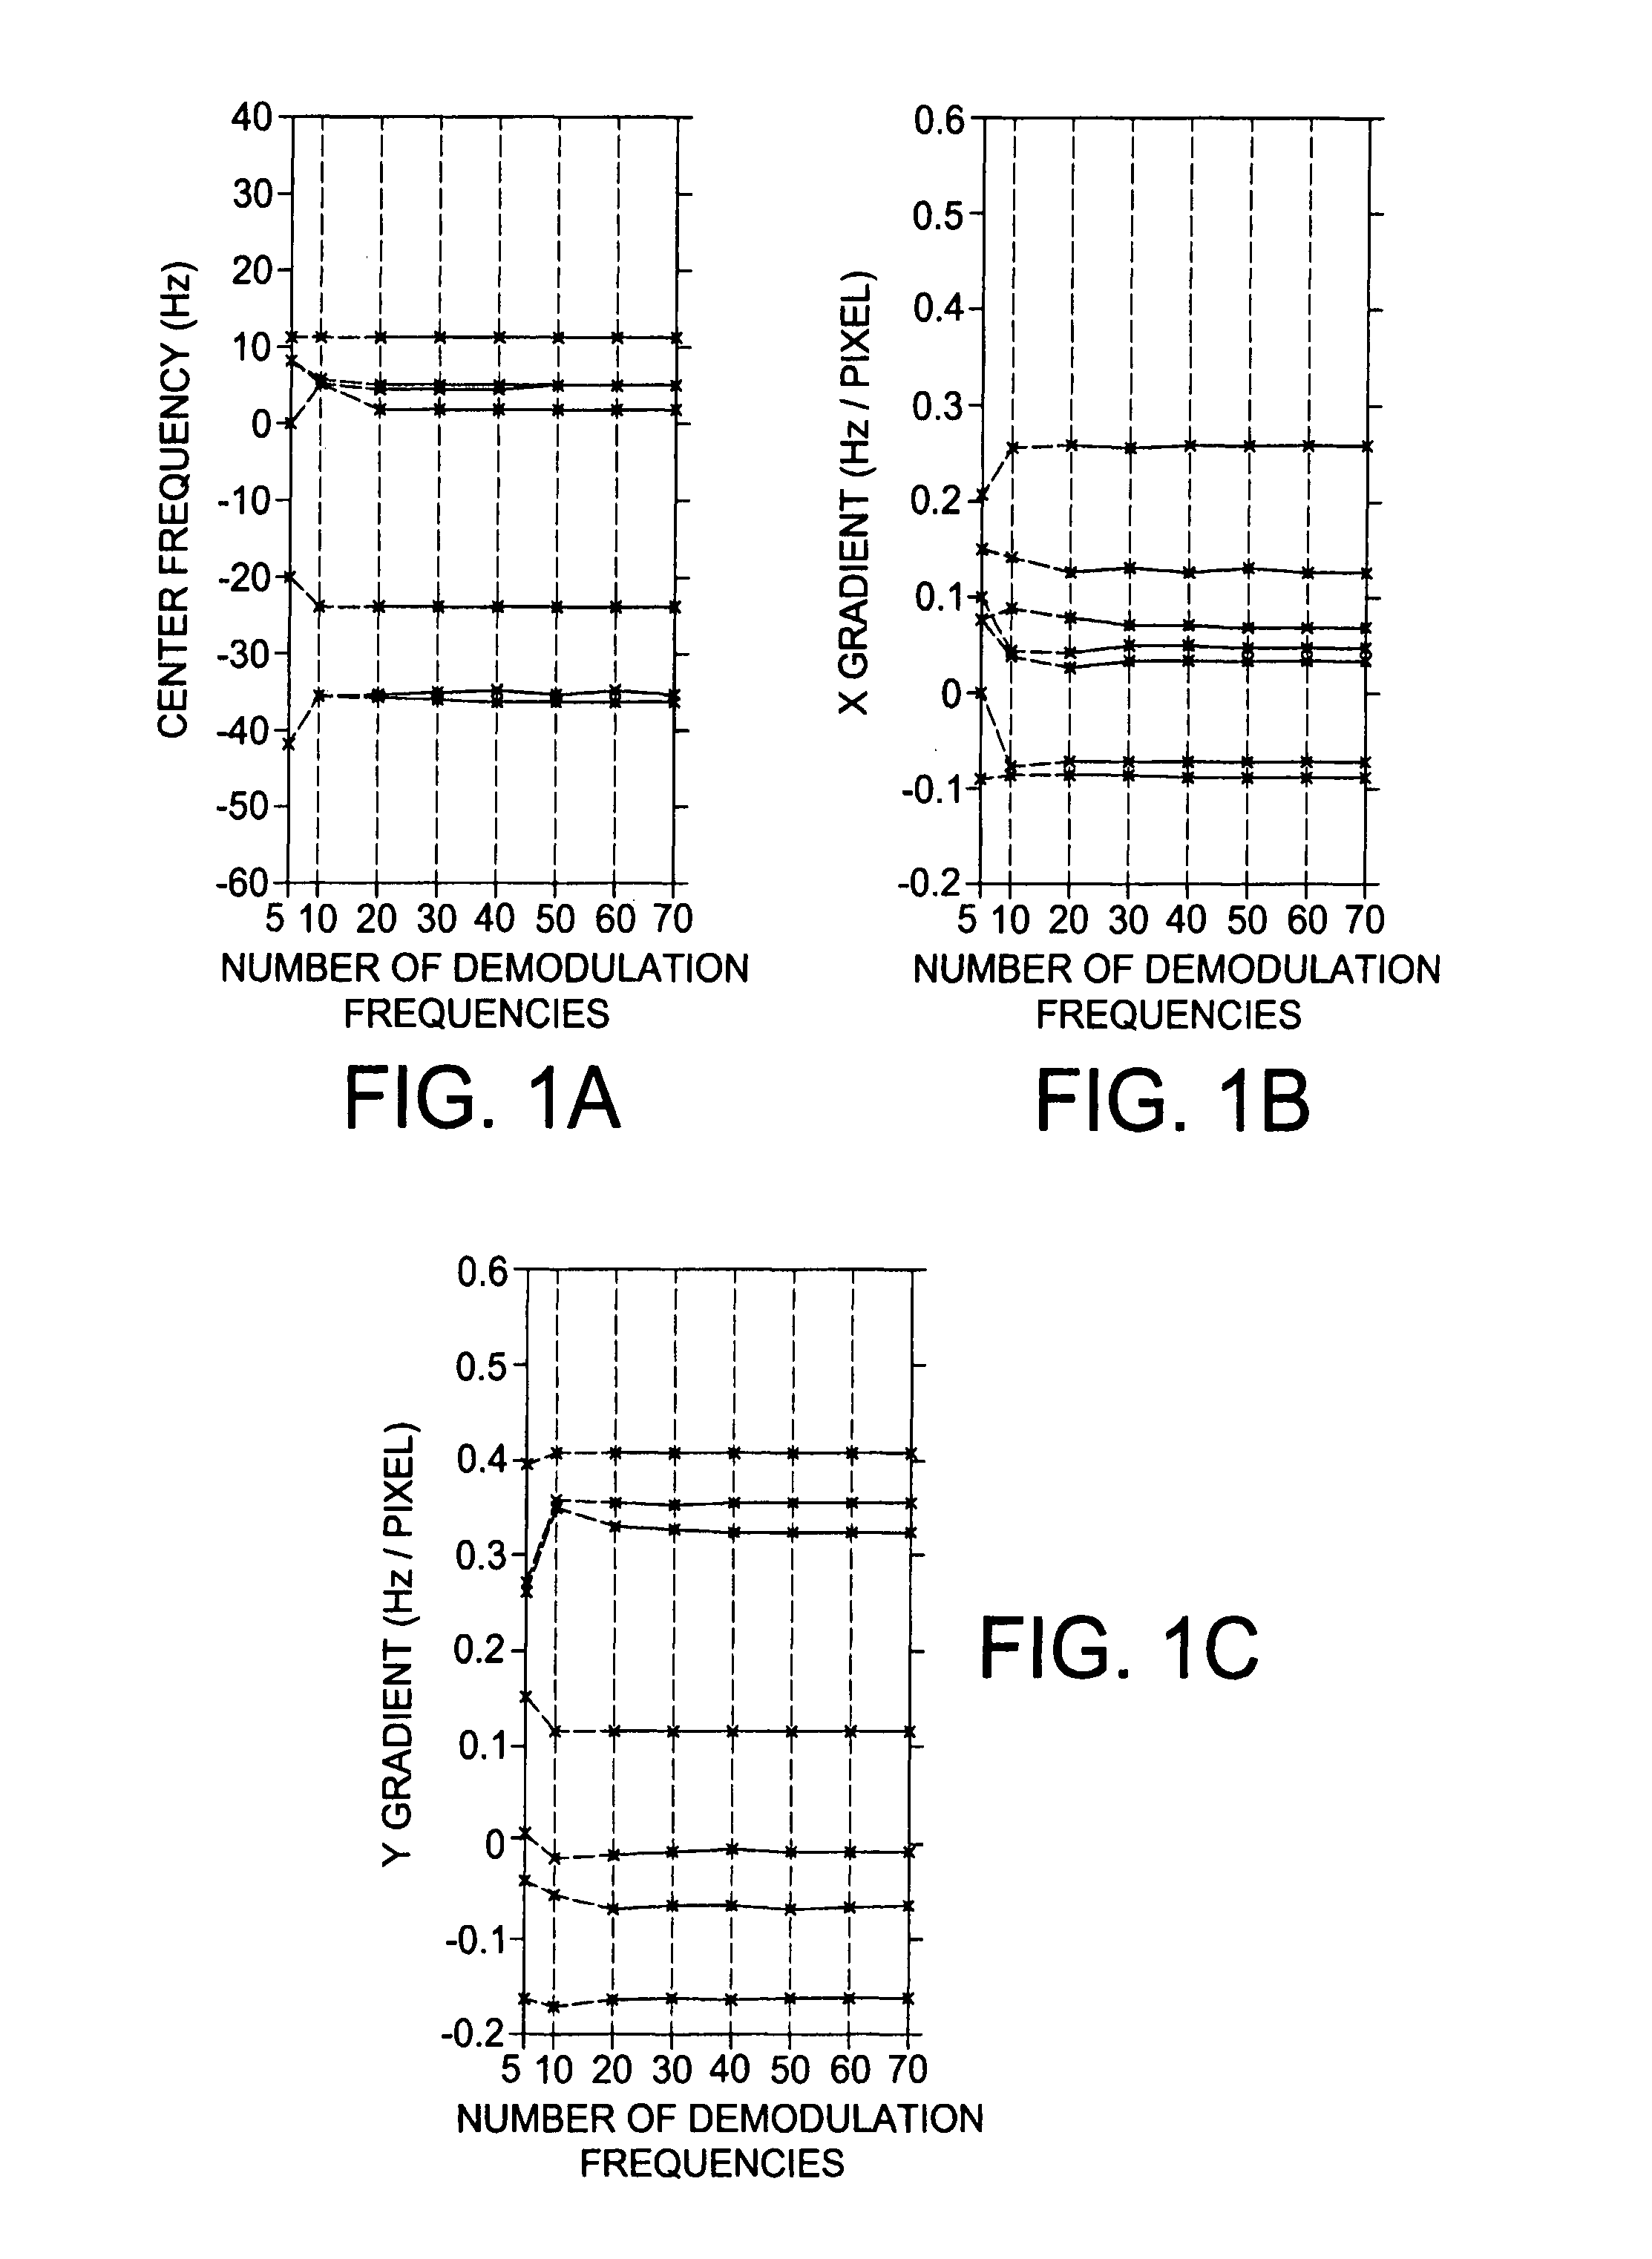 Fast automatic linear off-resonance correction method for spiral imaging